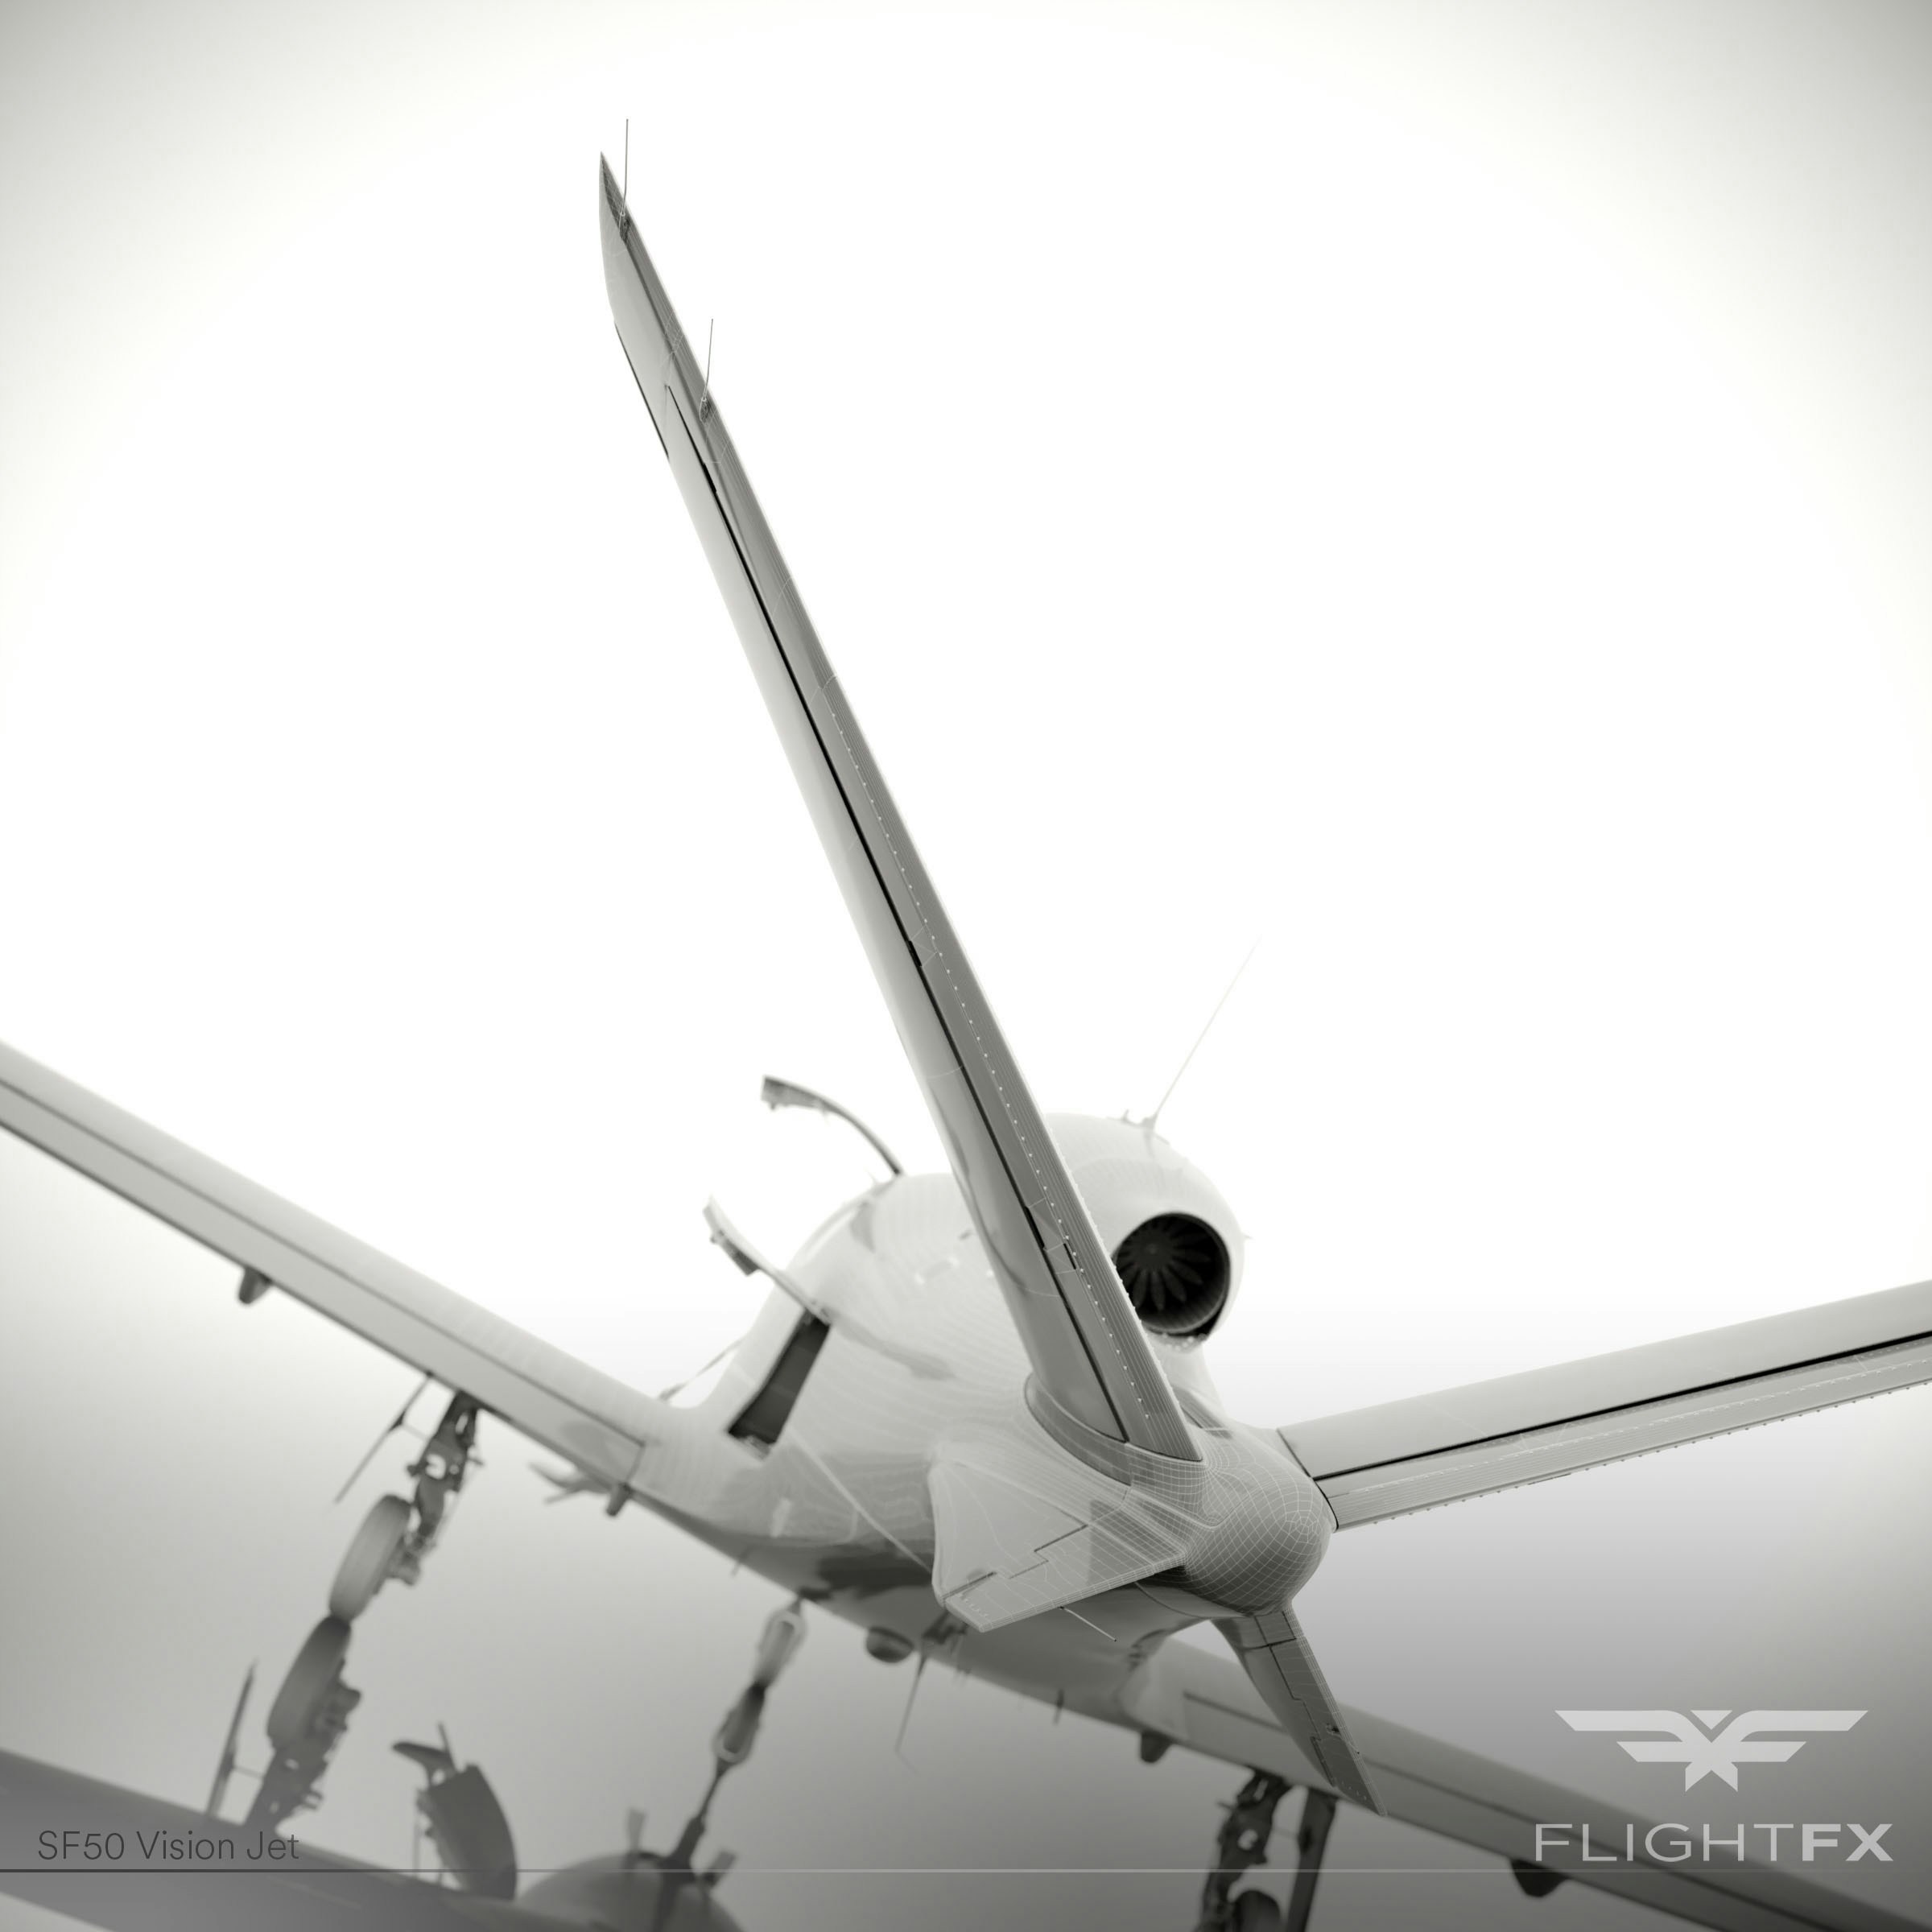 New Previews for the FlightFX Cirrus SF50 Vision Jet